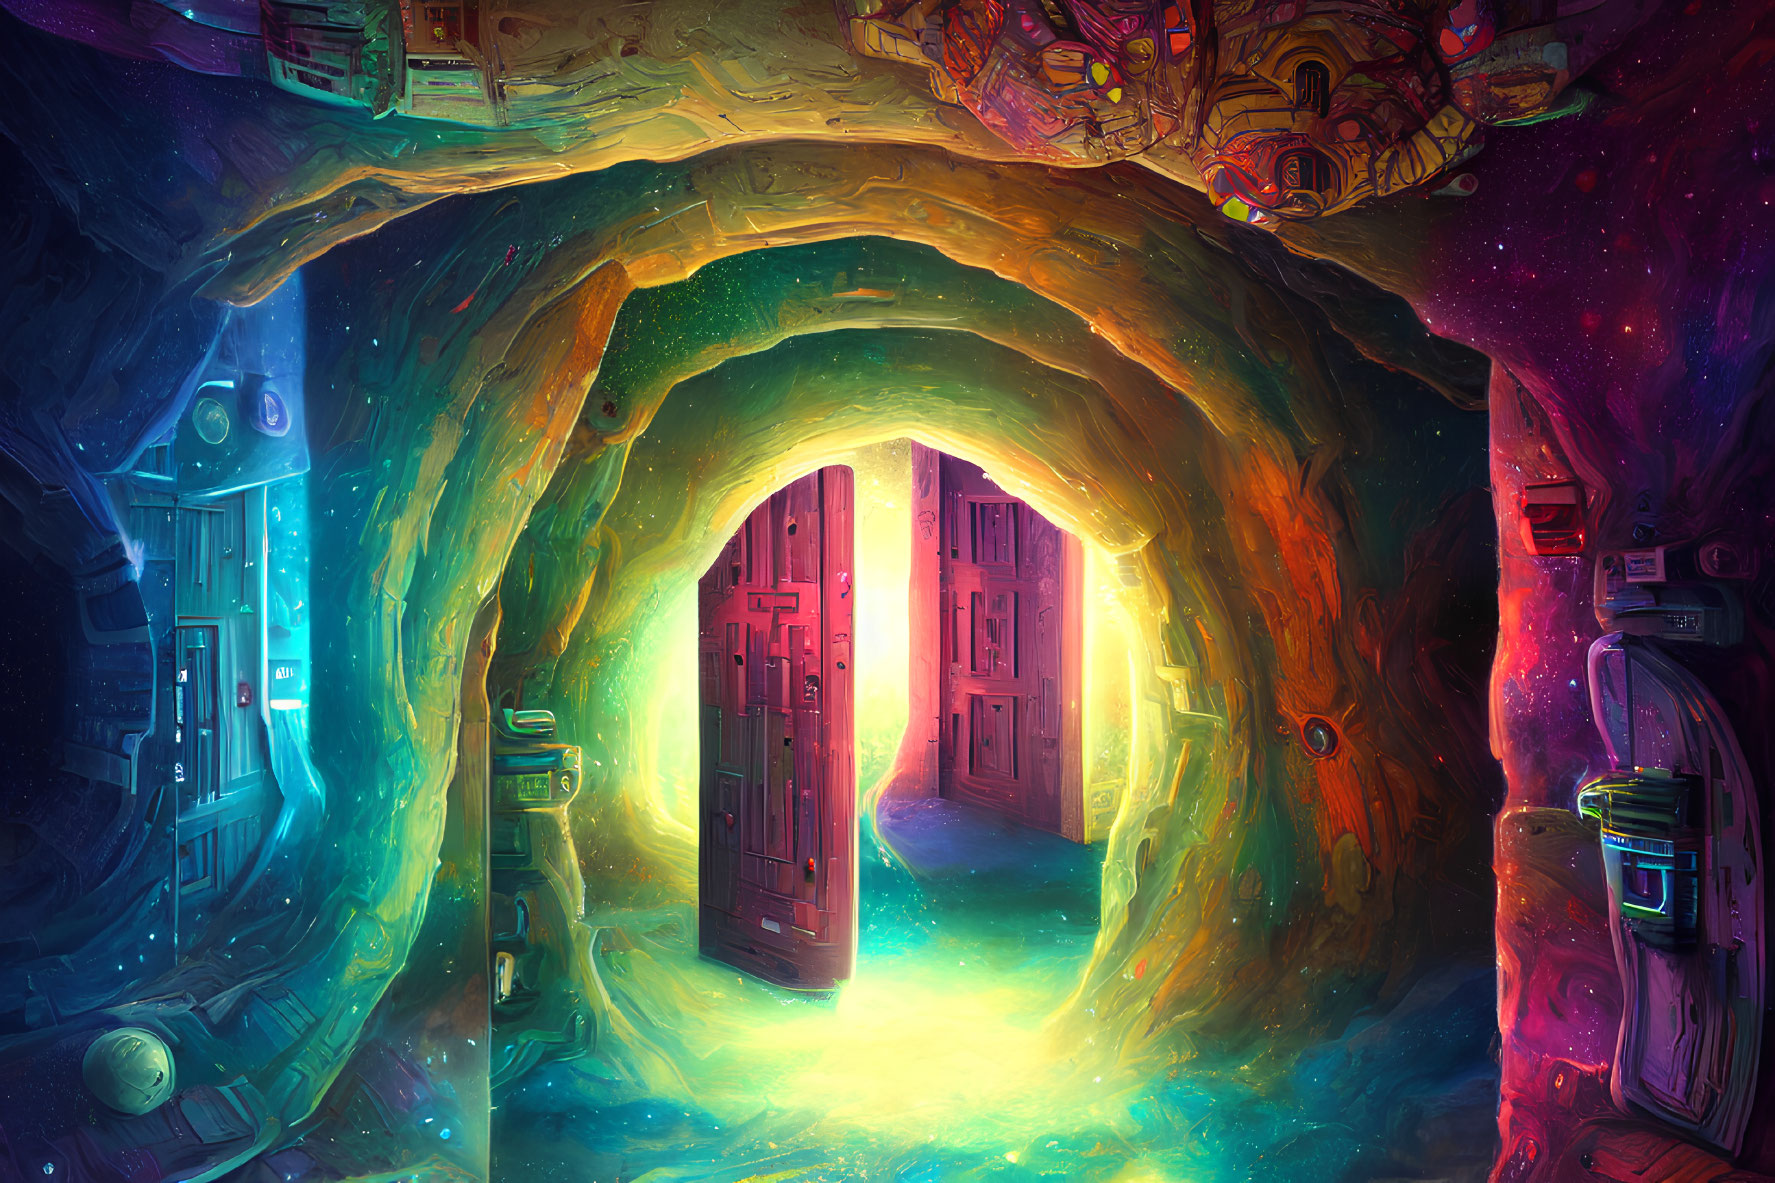 Fantastical glowing cave with mystical doorway and floating objects